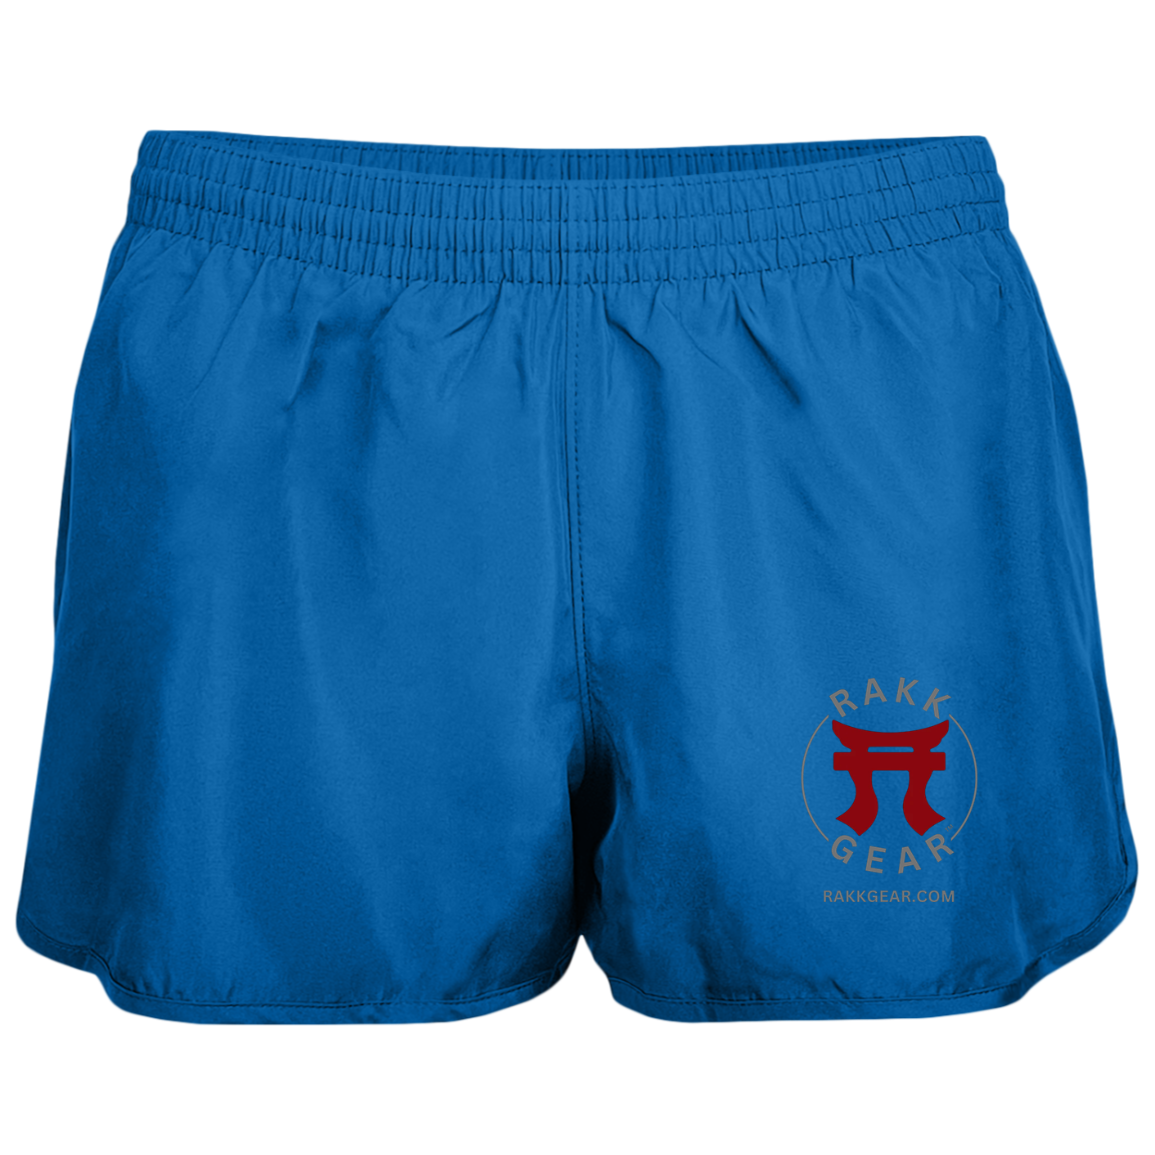 "Rakkgear Women's Wayfarer Running Shorts in Royal Blue, ideal for active pursuits with comfort and style in mind."